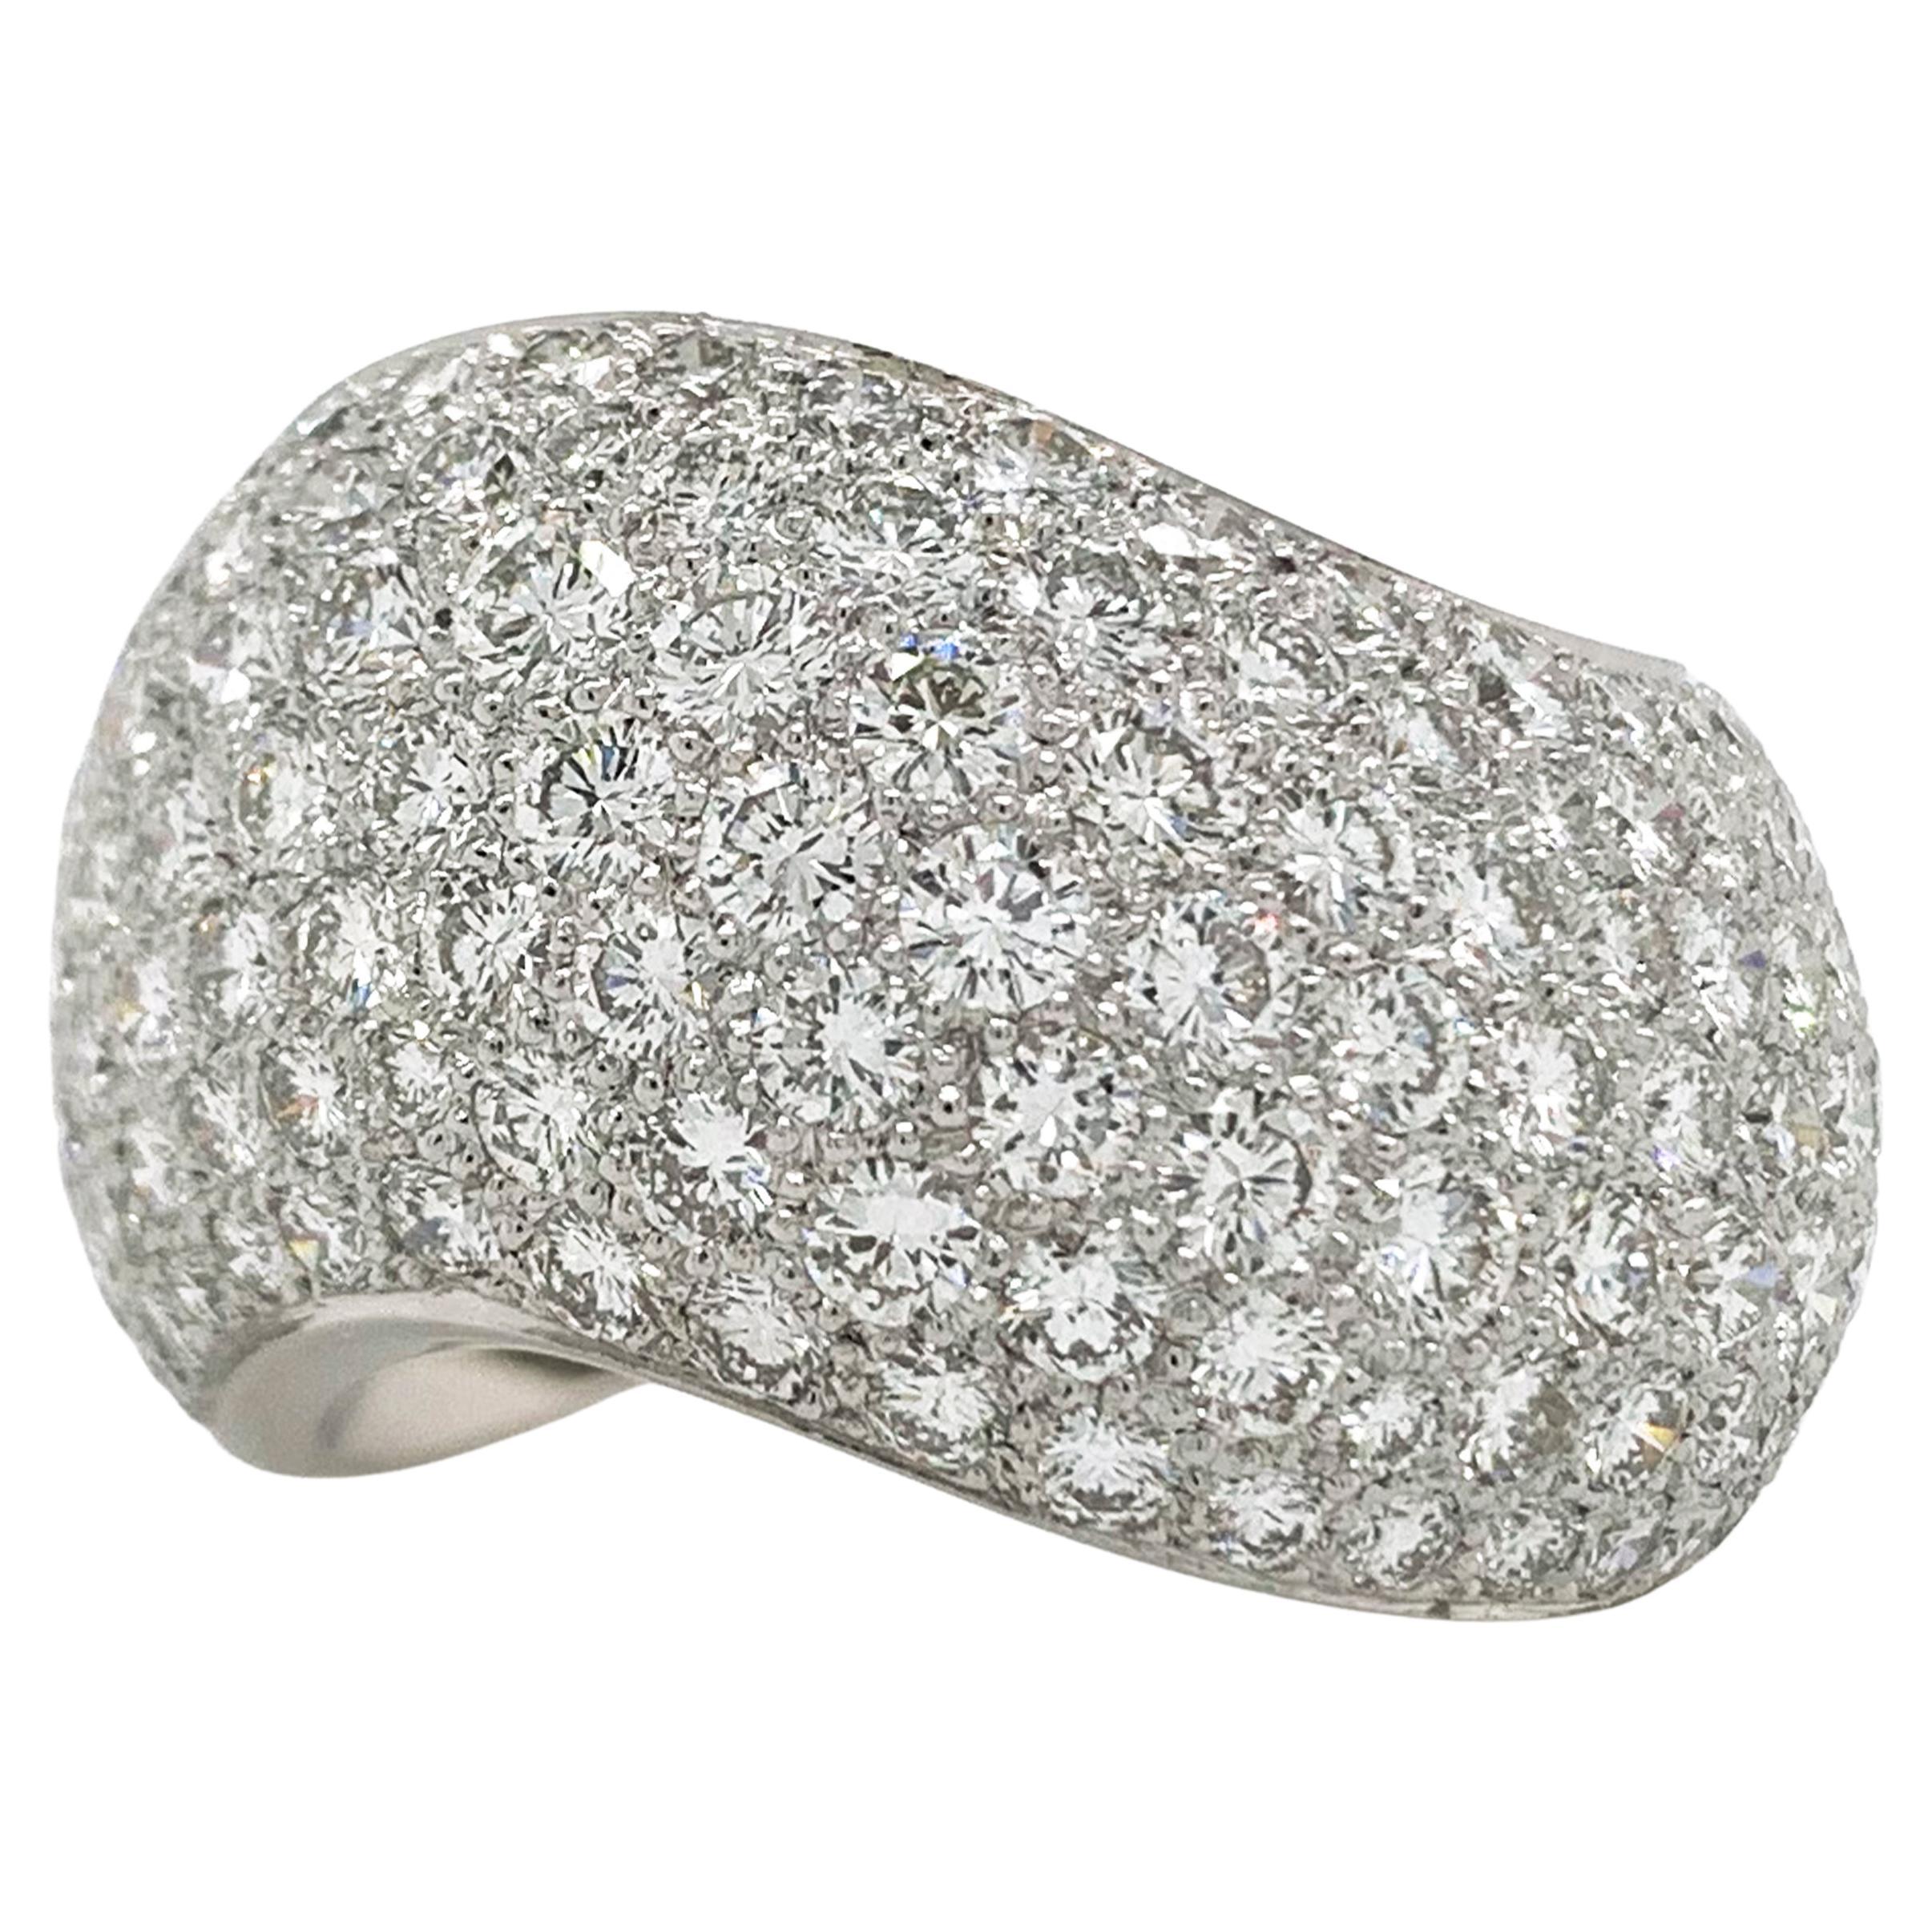 Cartier 5.50 Carat Pave Diamond Wave Ring in 18k White Gold